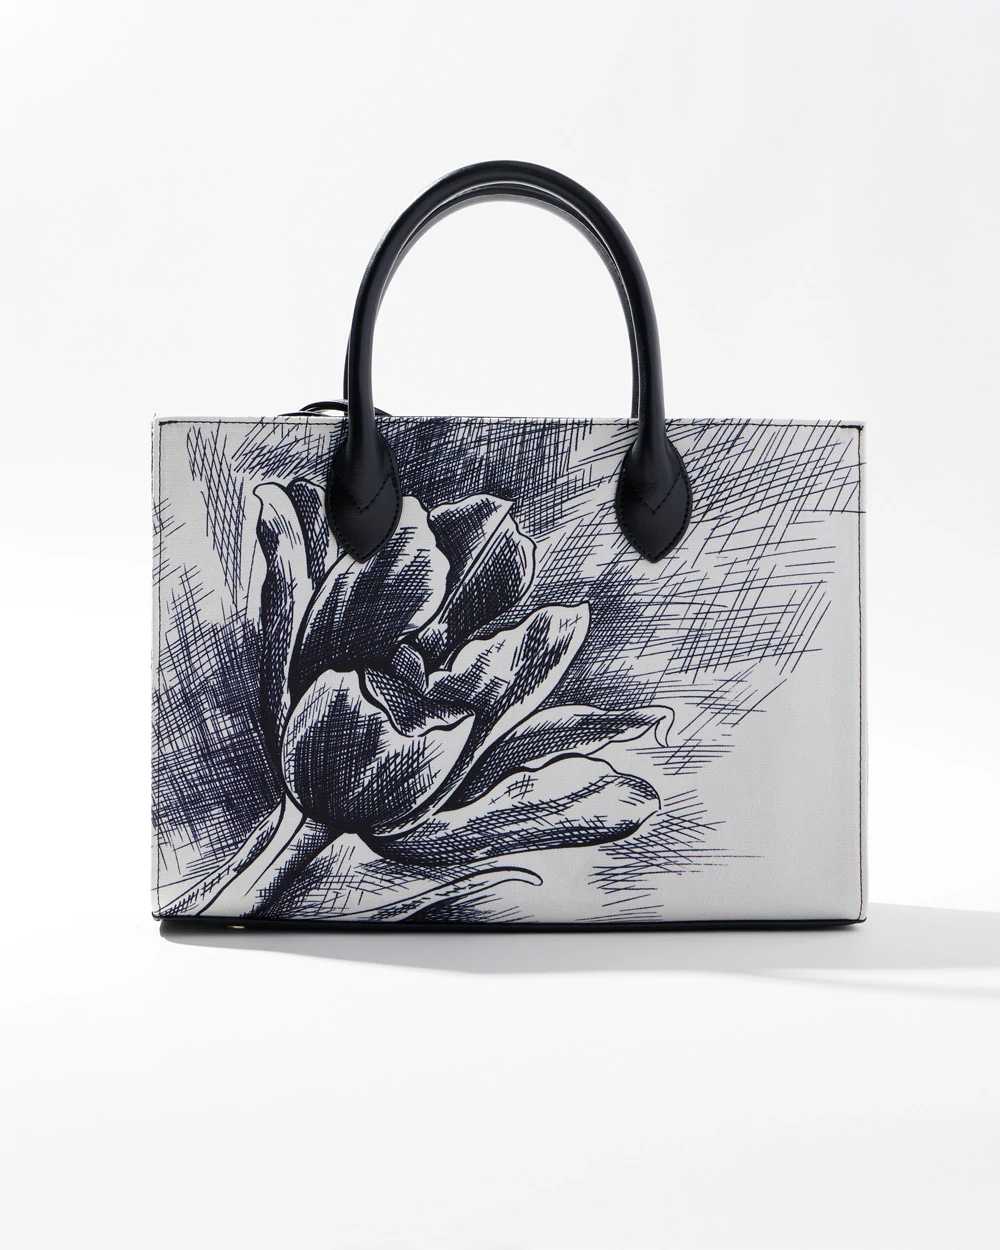 Sketched Floral Tote click to view larger image.